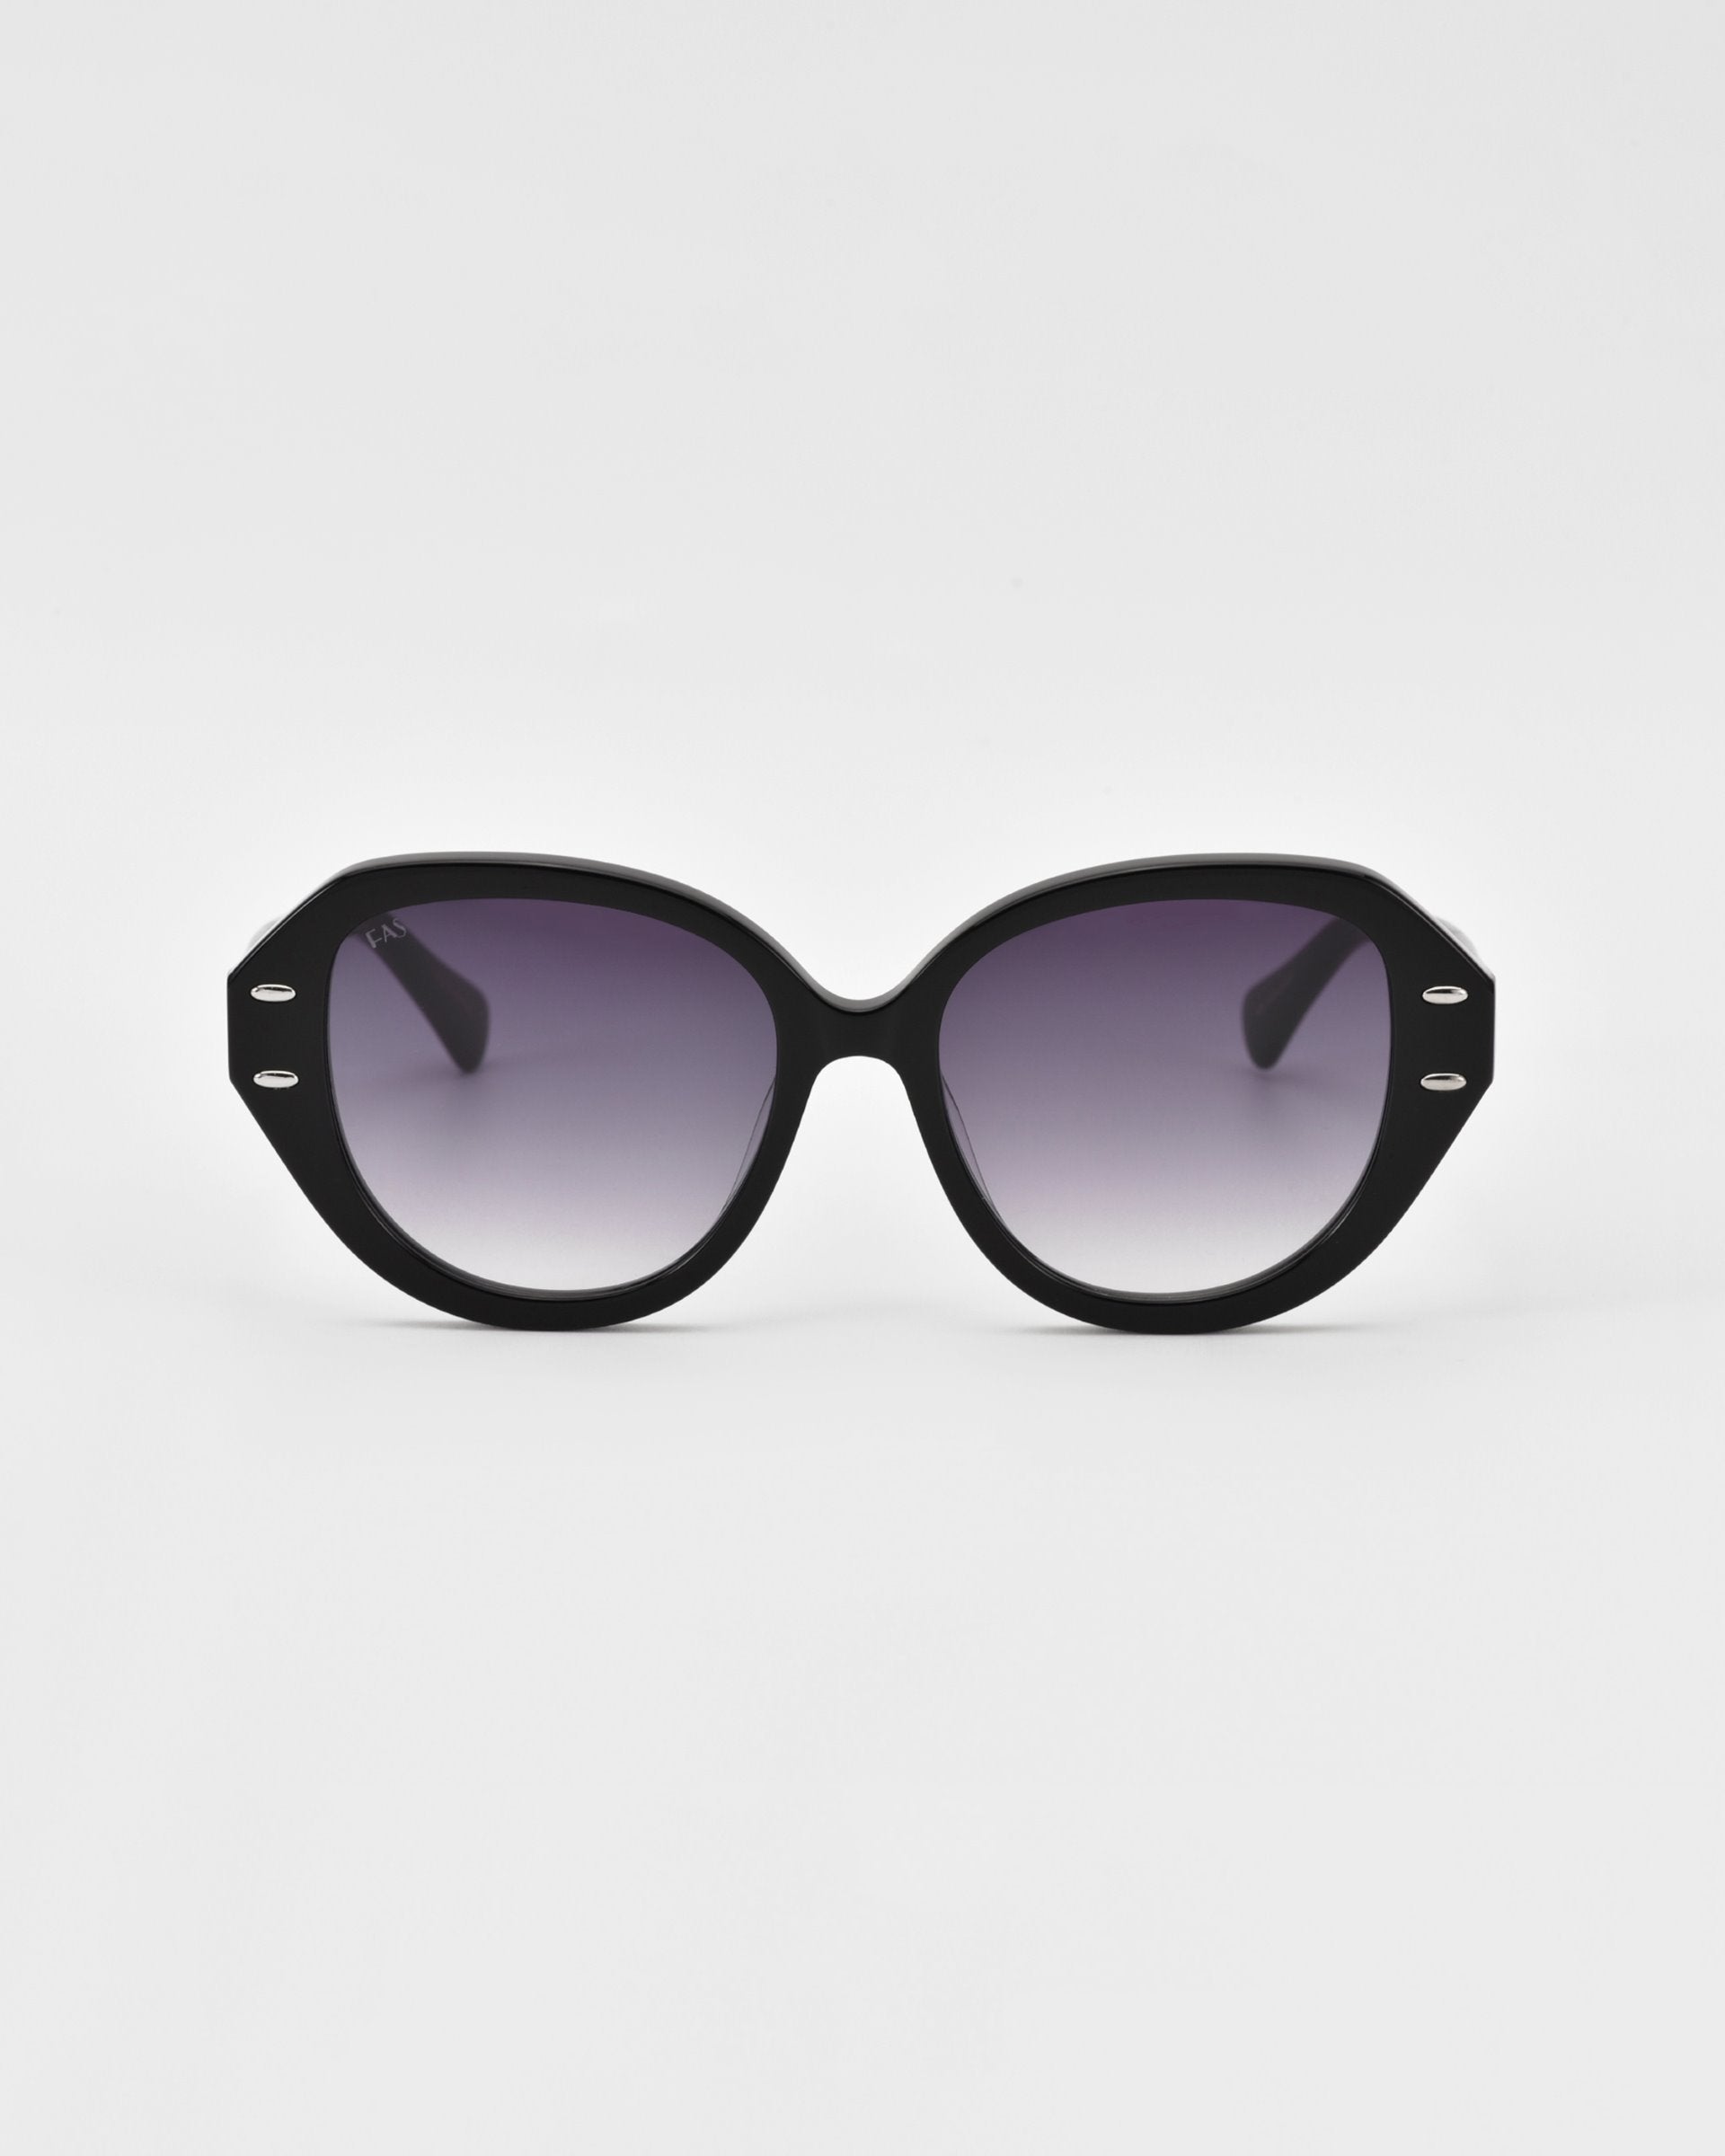 A pair of black oversized cat-eye Mirage sunglasses from For Art&#39;s Sake® with dark gradient lenses and silver accents on the temples. The frame, crafted from plant-based acetate, boasts a slightly geometric shape and is set against a plain white background.